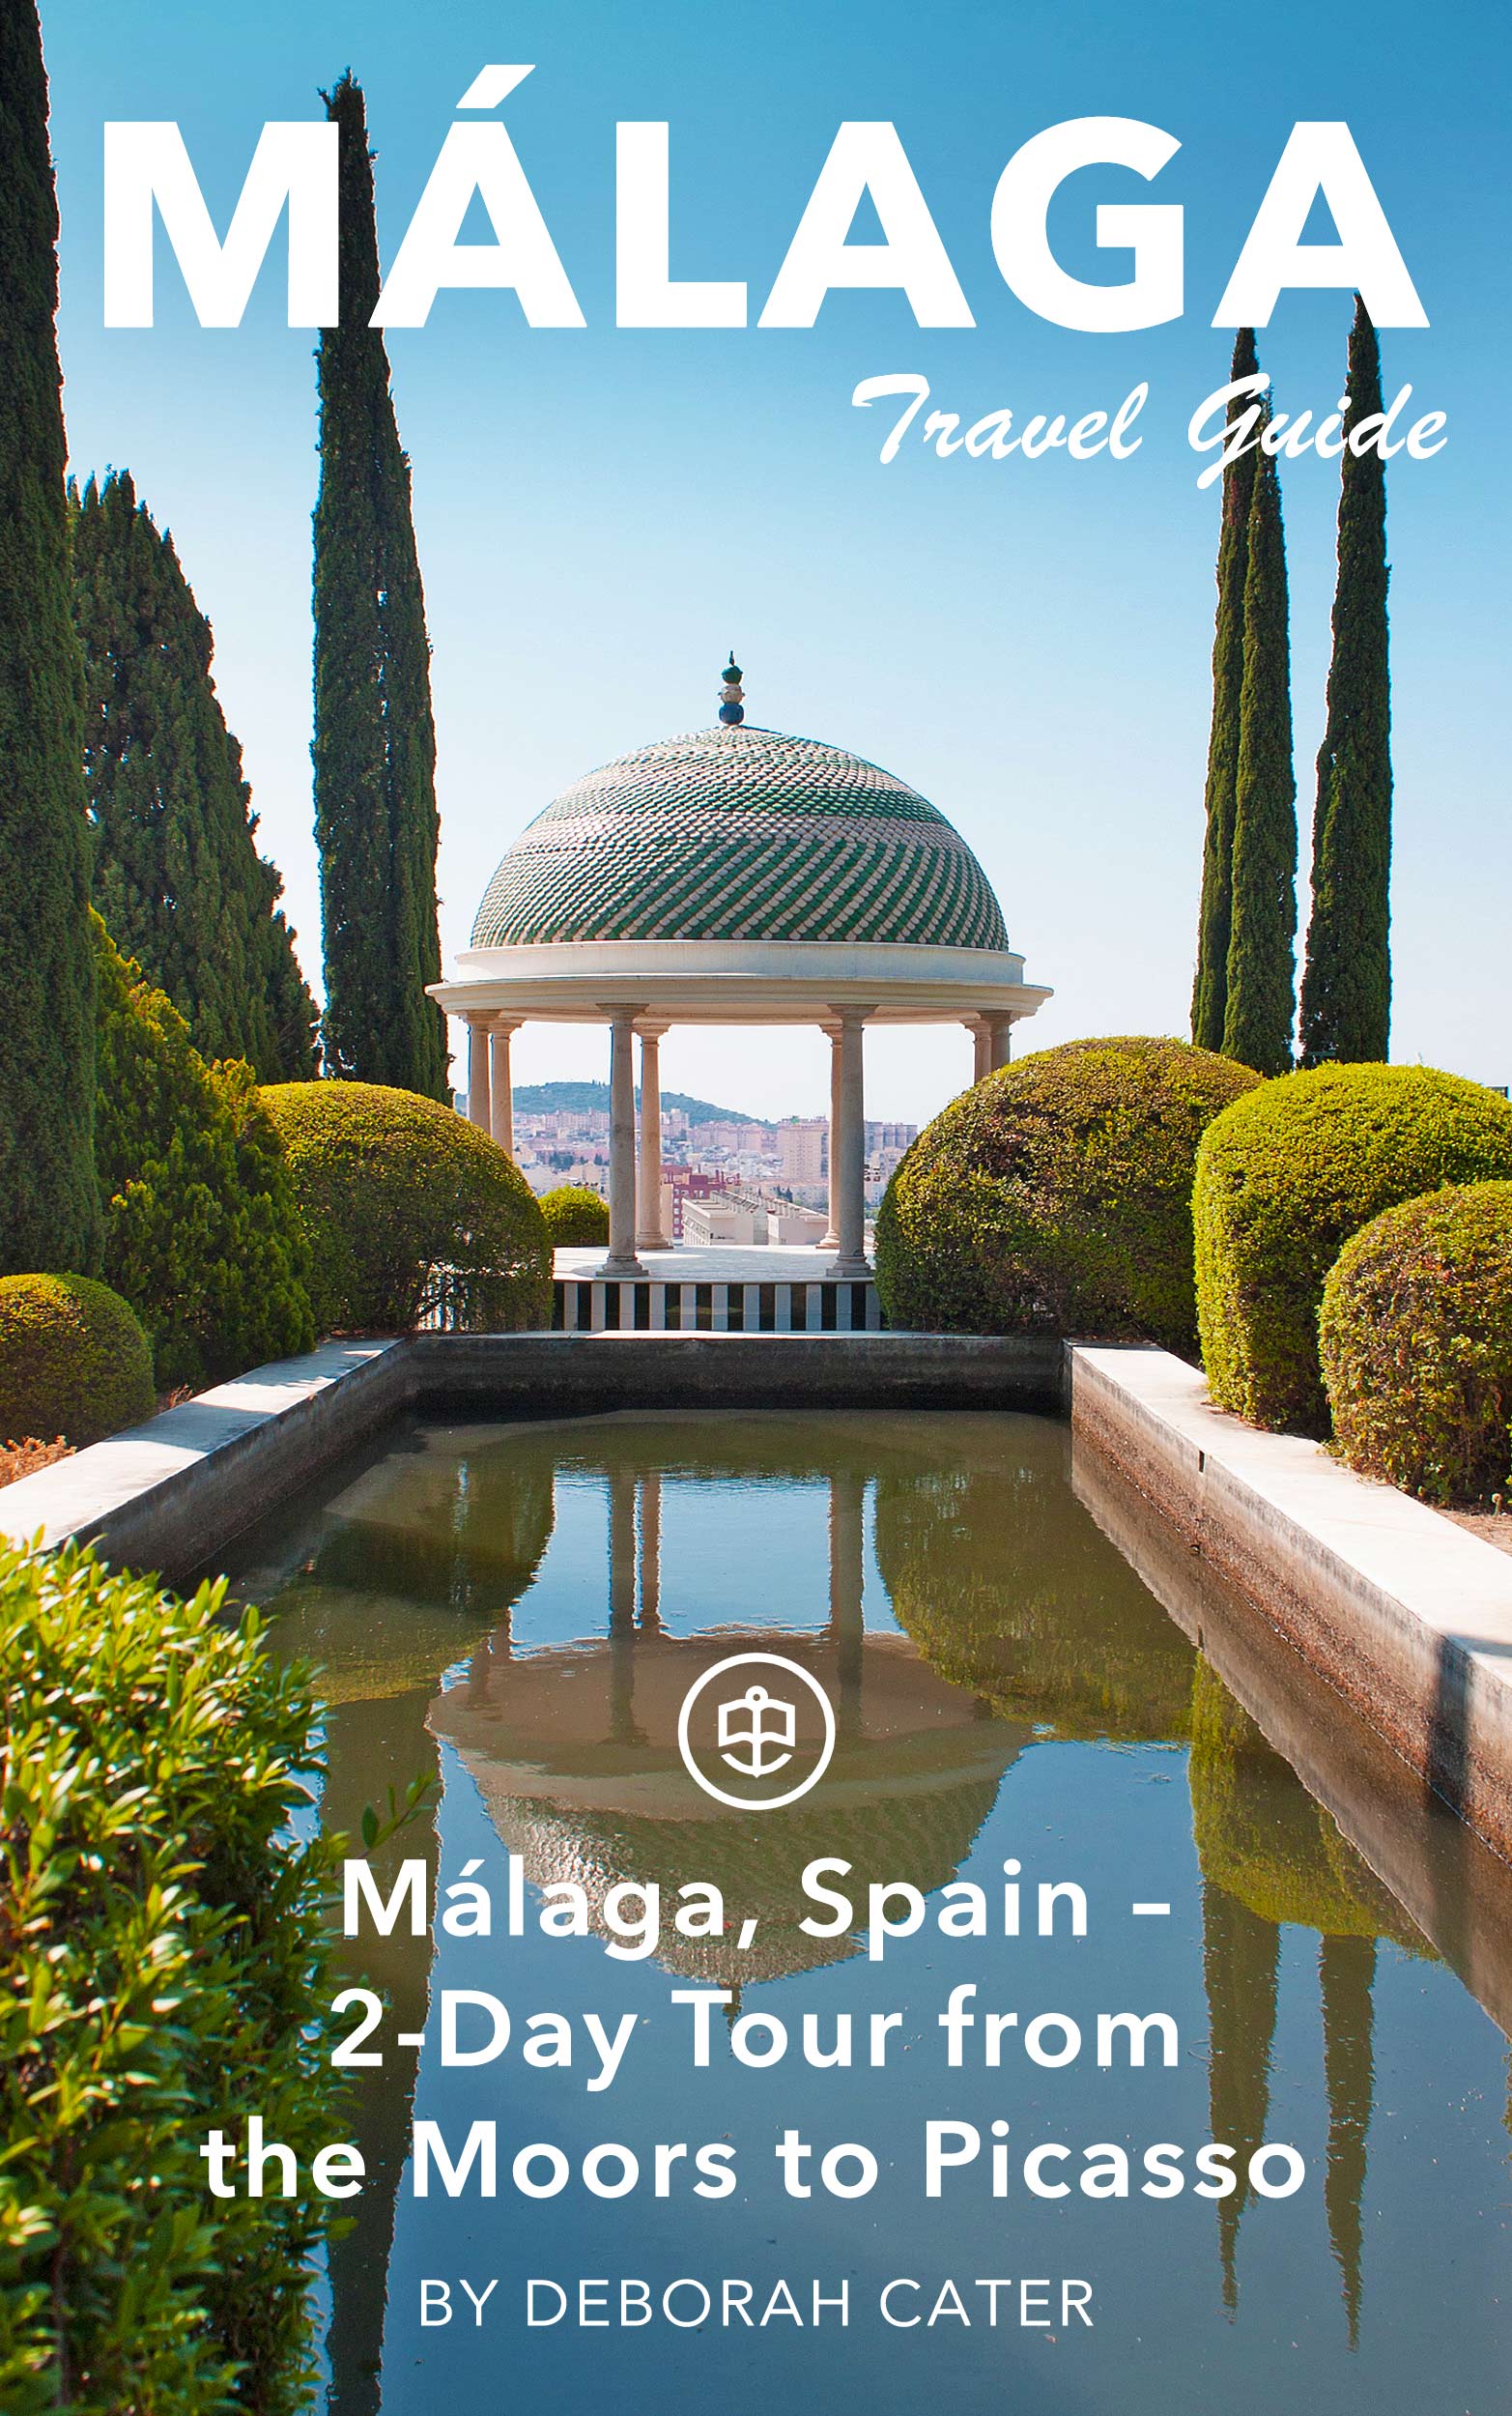 Málaga, Spain – 2-Day Tour from the Moors to Picasso